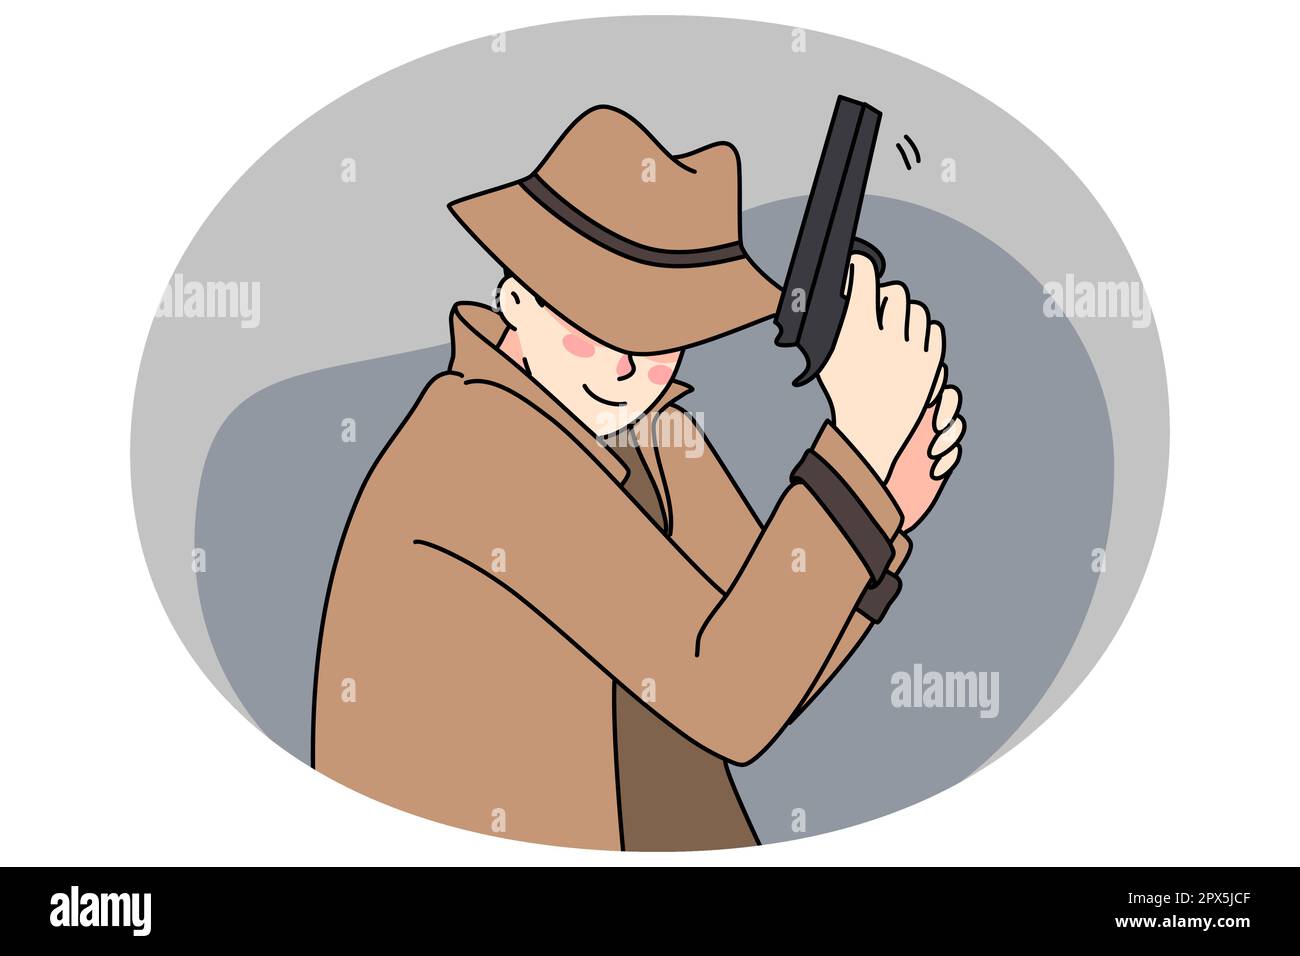 Male detective in coat and hat holding gun spying for criminal or suspect. Man spy or police officer undercover pursue offender with firearm. Private agent work. Vector illustration. Stock Vector